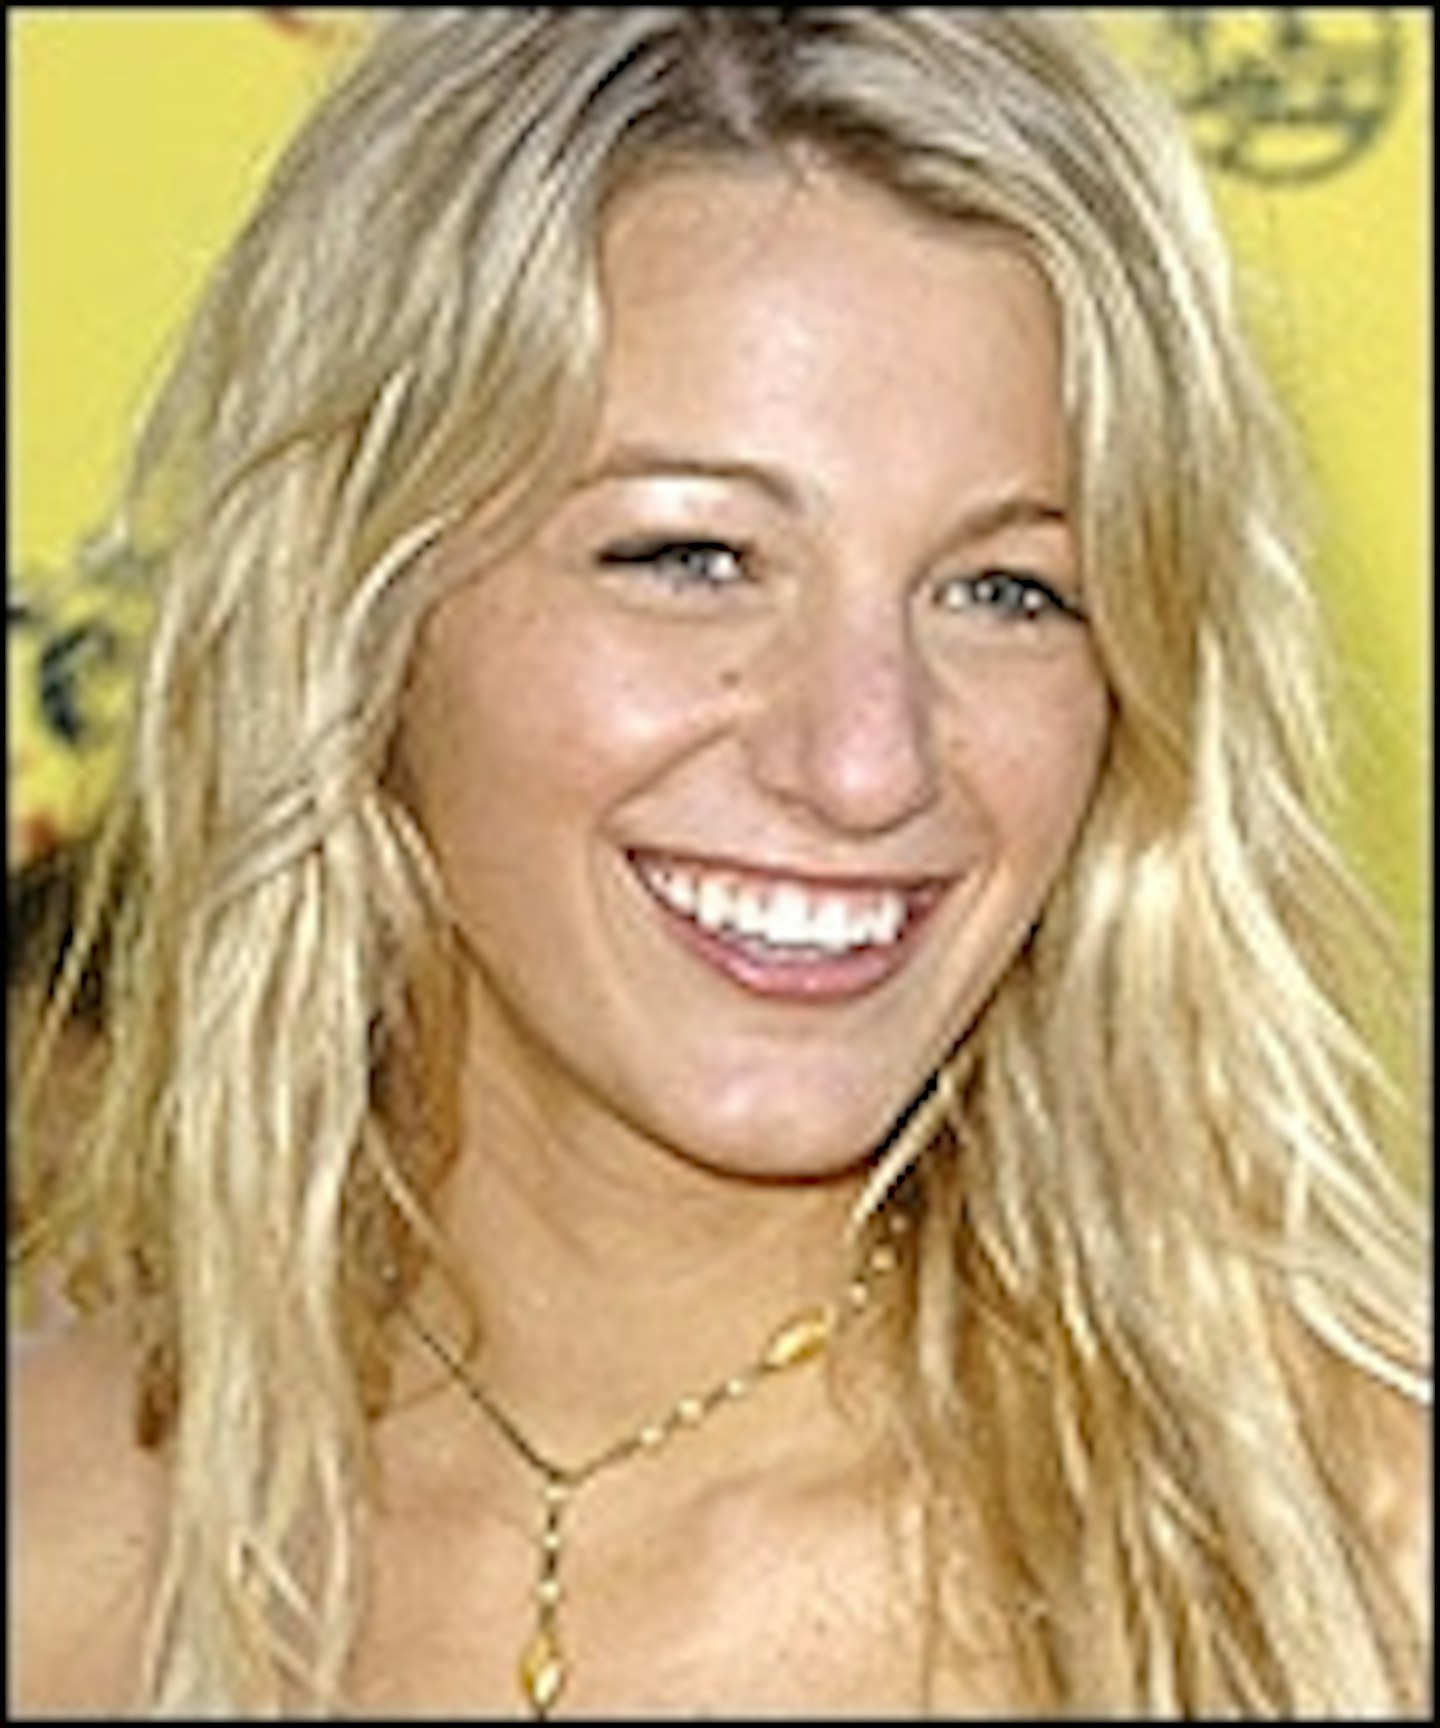 Blake Lively On For Hick, Movies